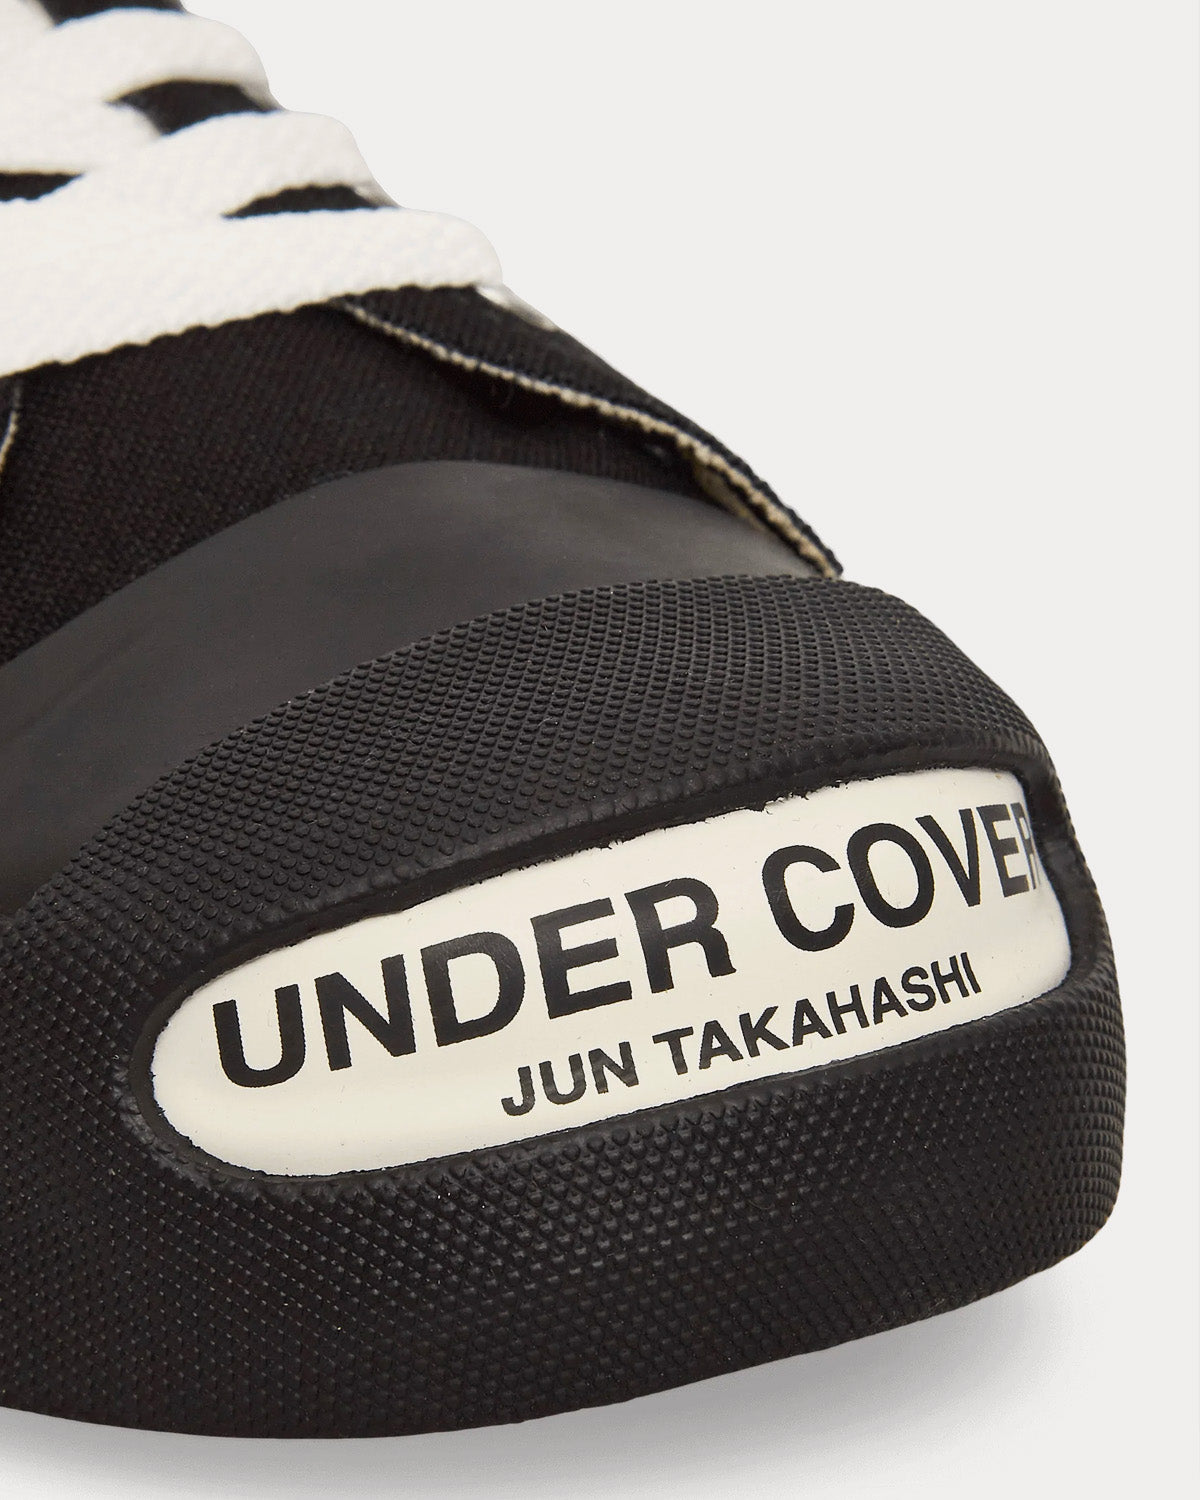 Undercover - Canvas Black Low Top Sneakers